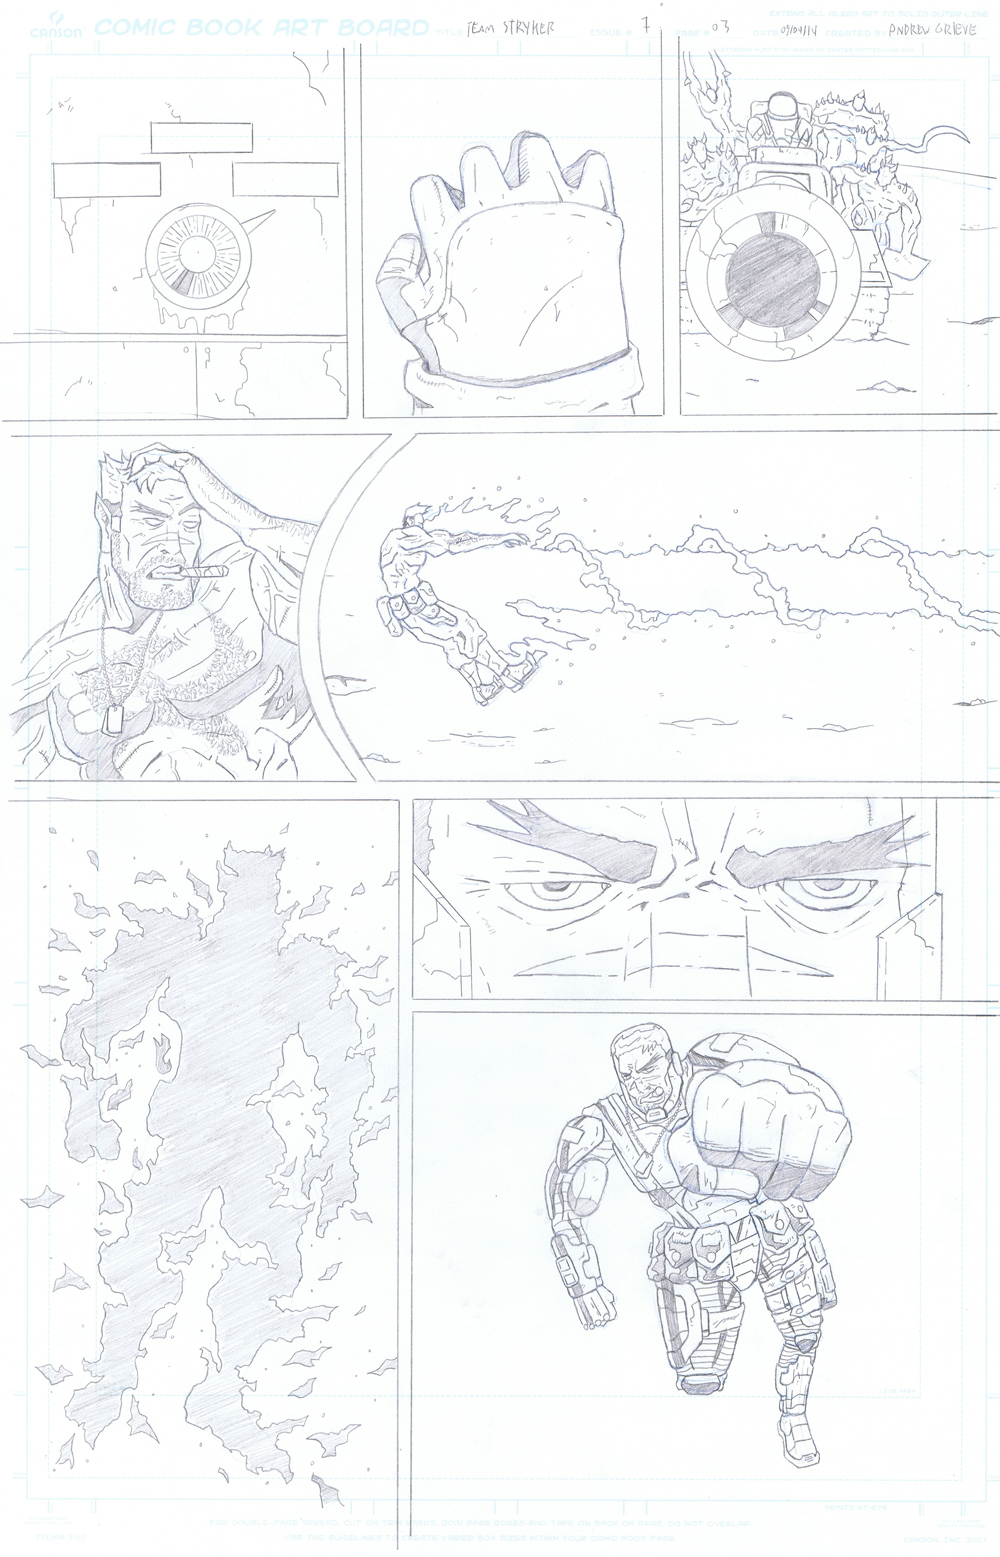 MISSION 007: PAGE 03 PENCIL